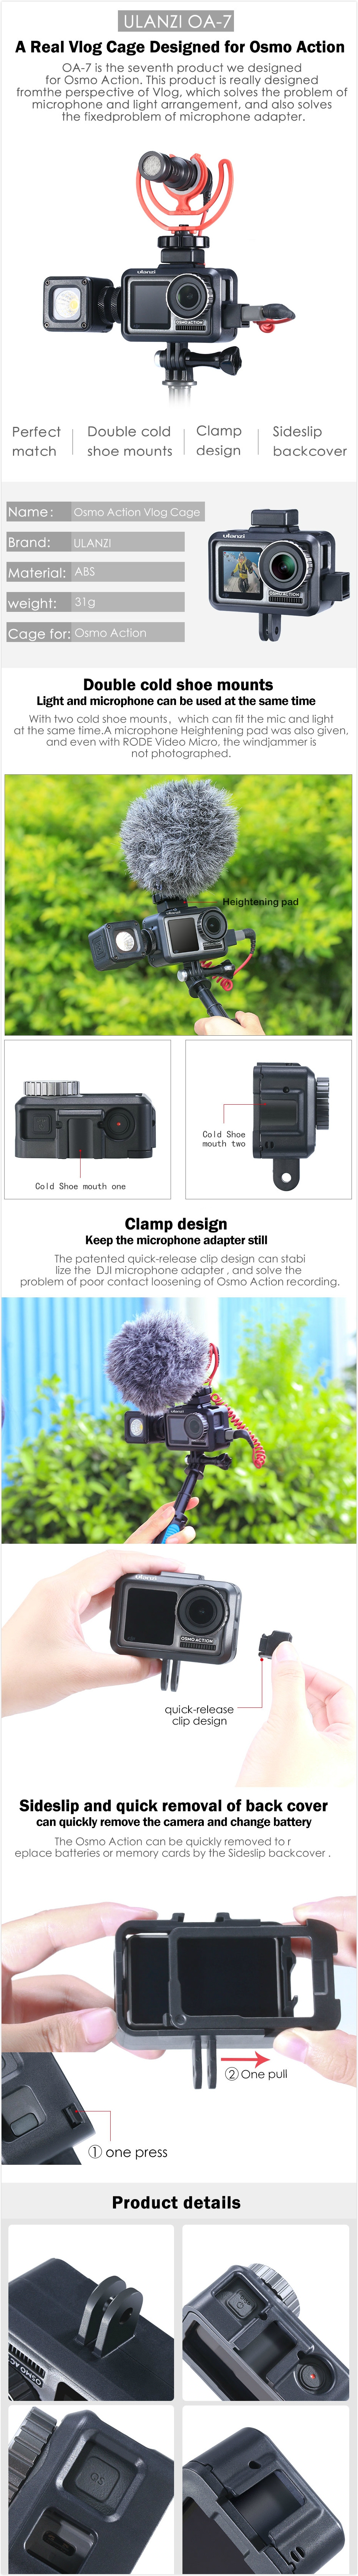 Ulanzi OA-7 OSMO Action Vlog Cage Protective Video Case Frame Mount Housing Shell Cover for DJI OSMO Action Camera